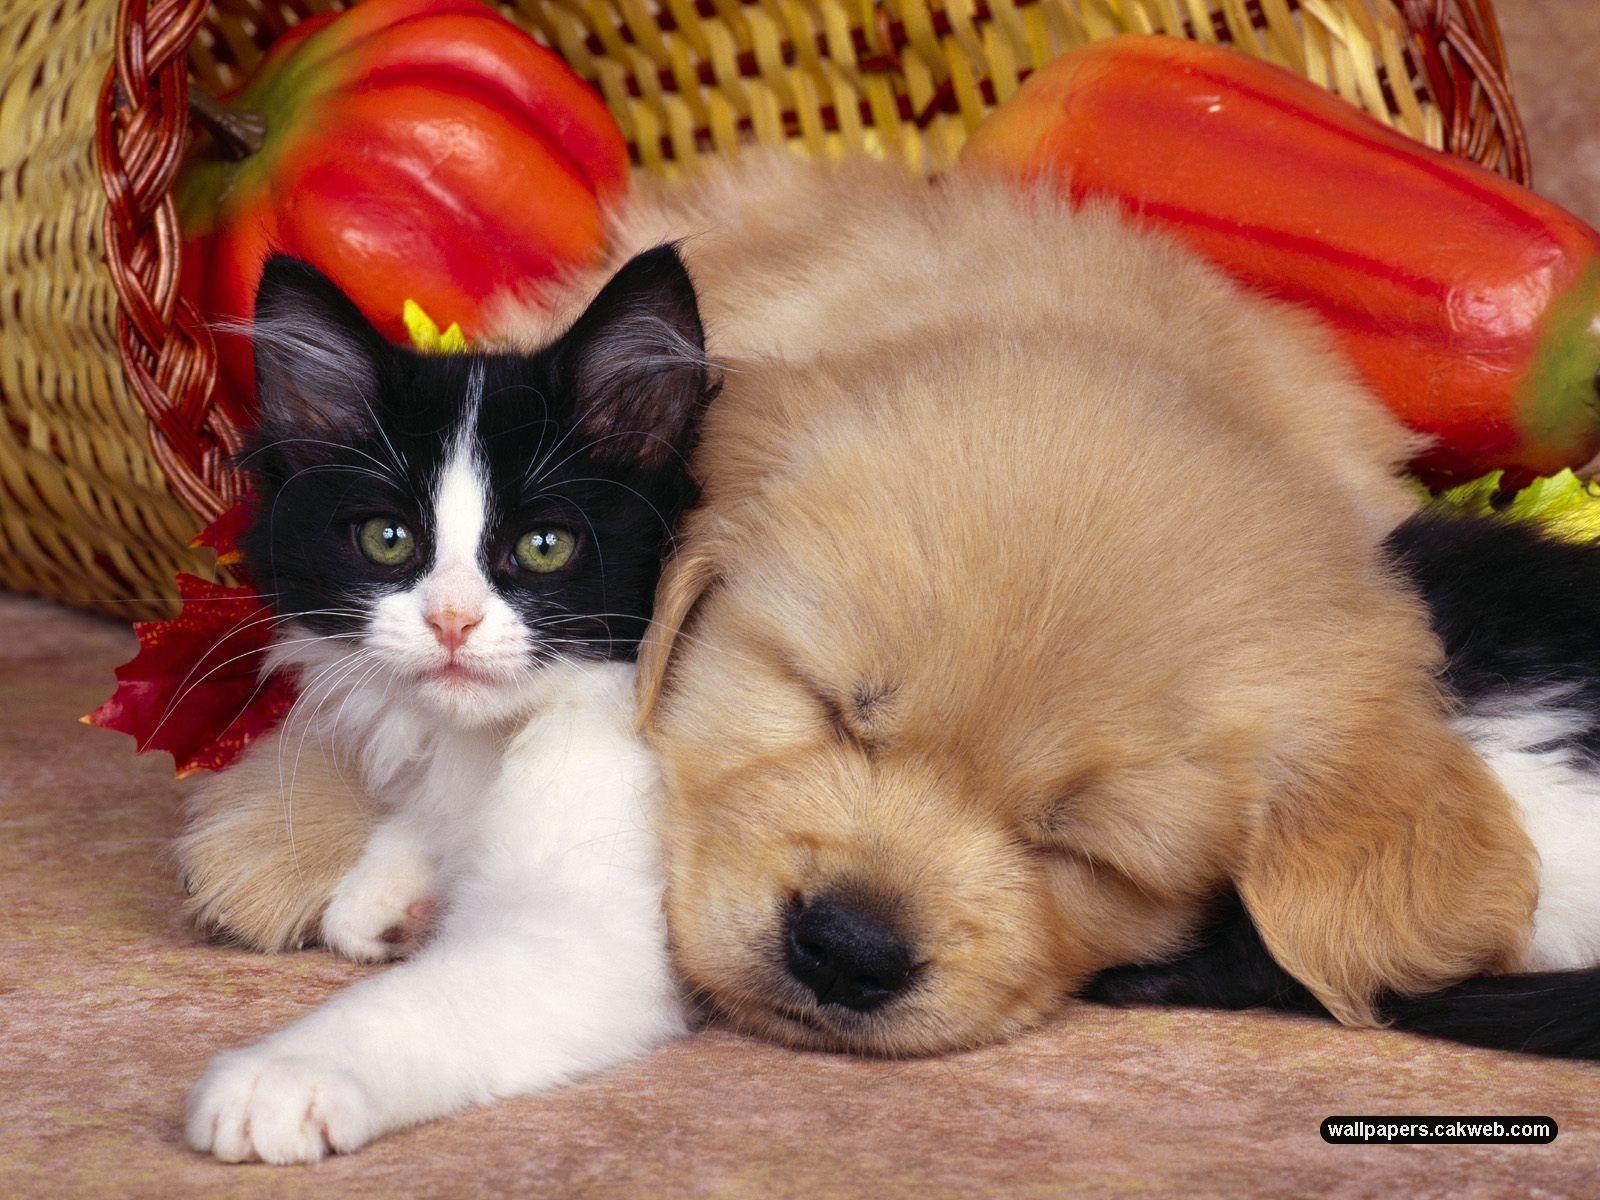 Astounding funny cats and dogs picture together together